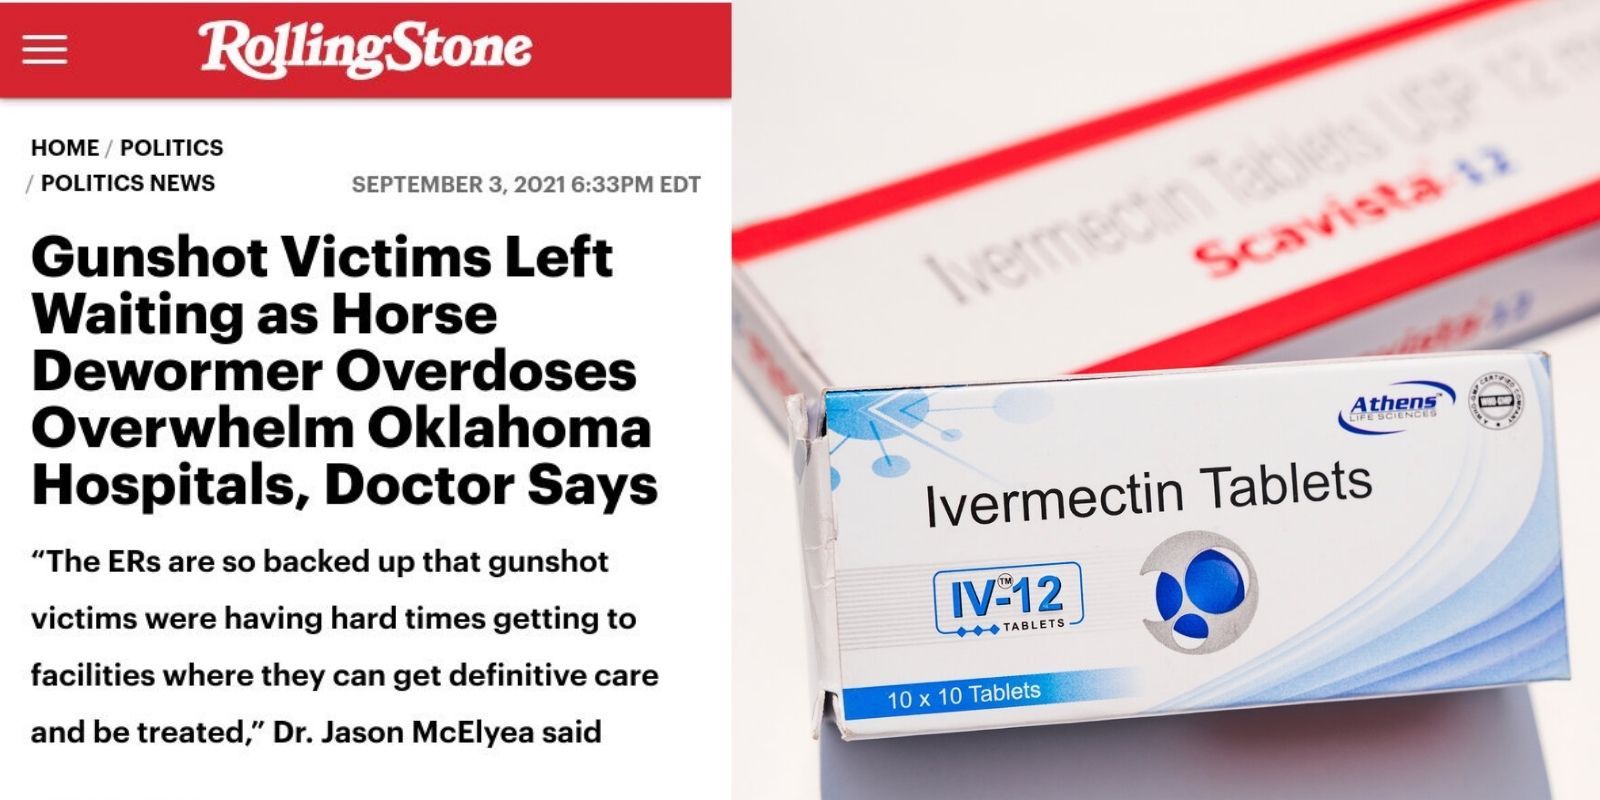 Rolling Stone humiliated after story about hospitals 'overwhelmed' by patients overdosing on Ivermectin falls apart | The Post Millennial